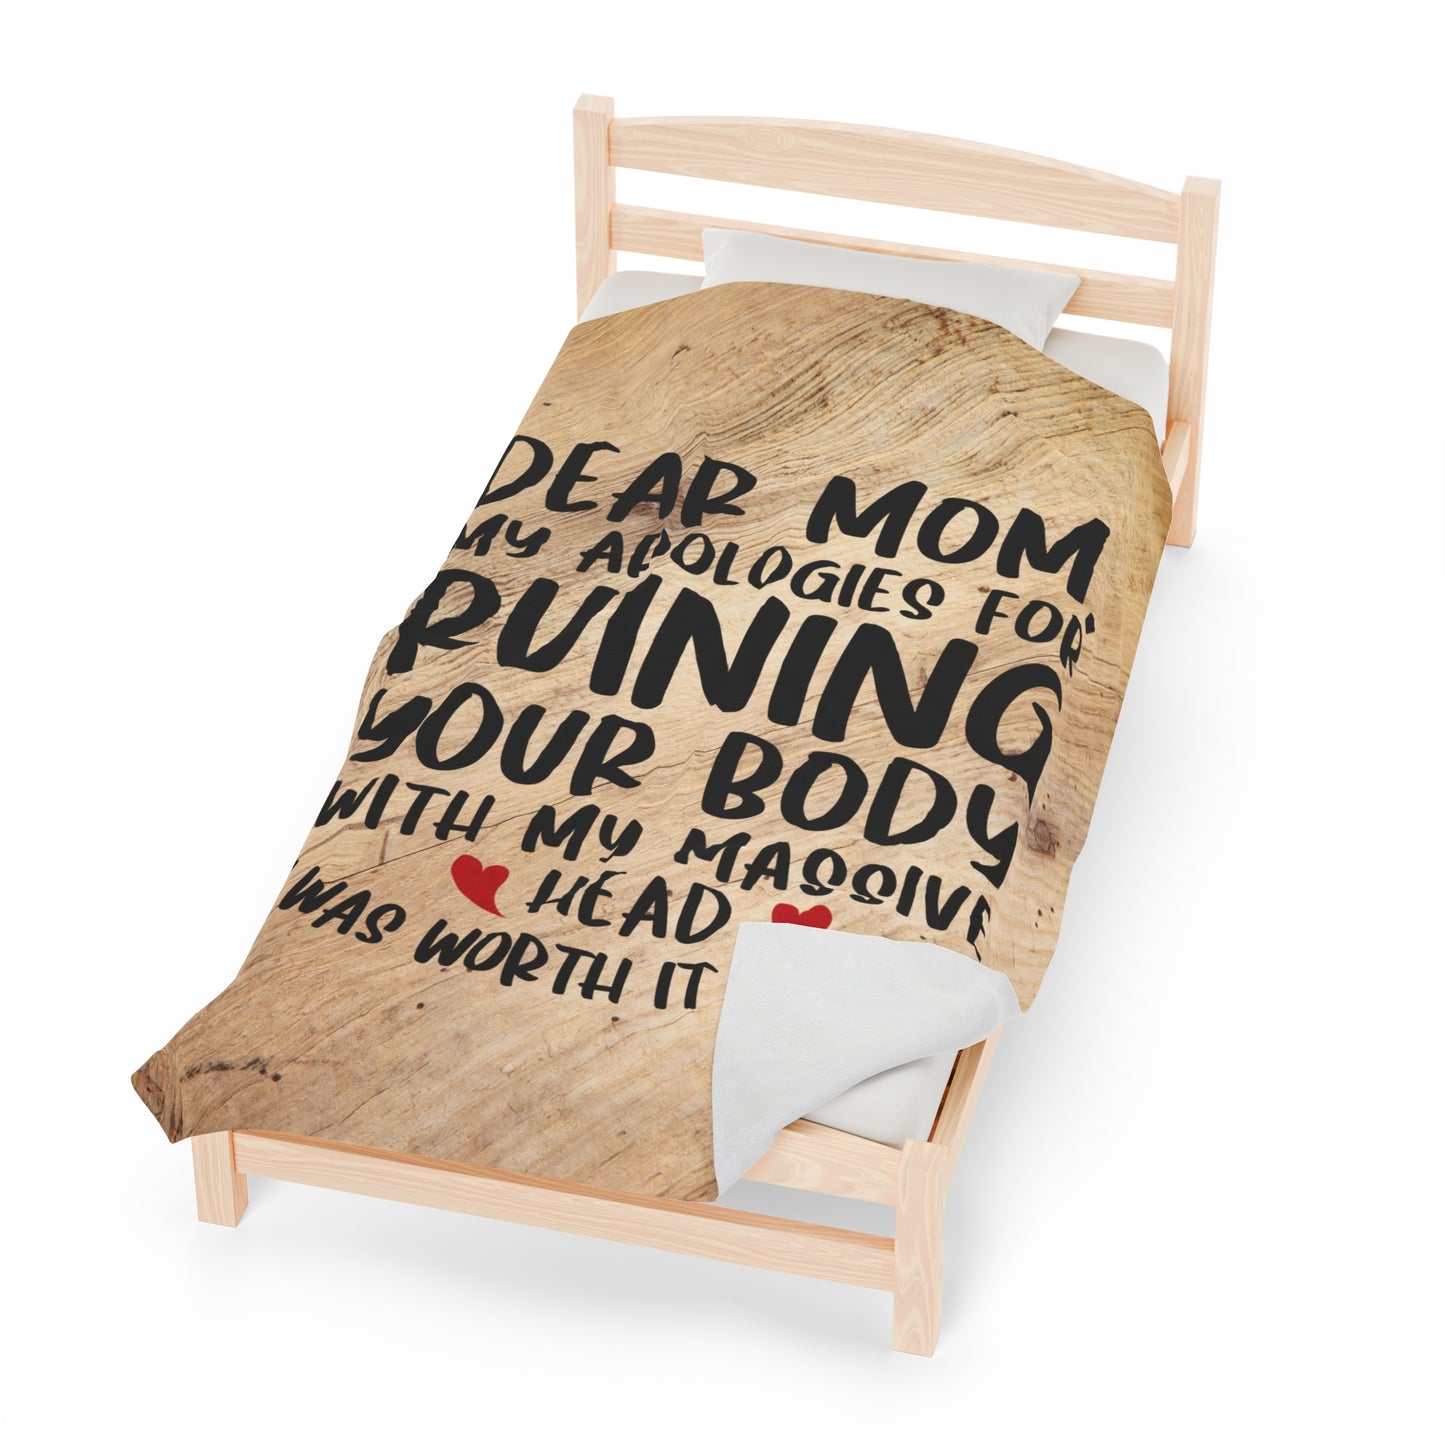 "Dear Mom" Blanket - Weave Got Gifts - Unique Gifts You Won’t Find Anywhere Else!